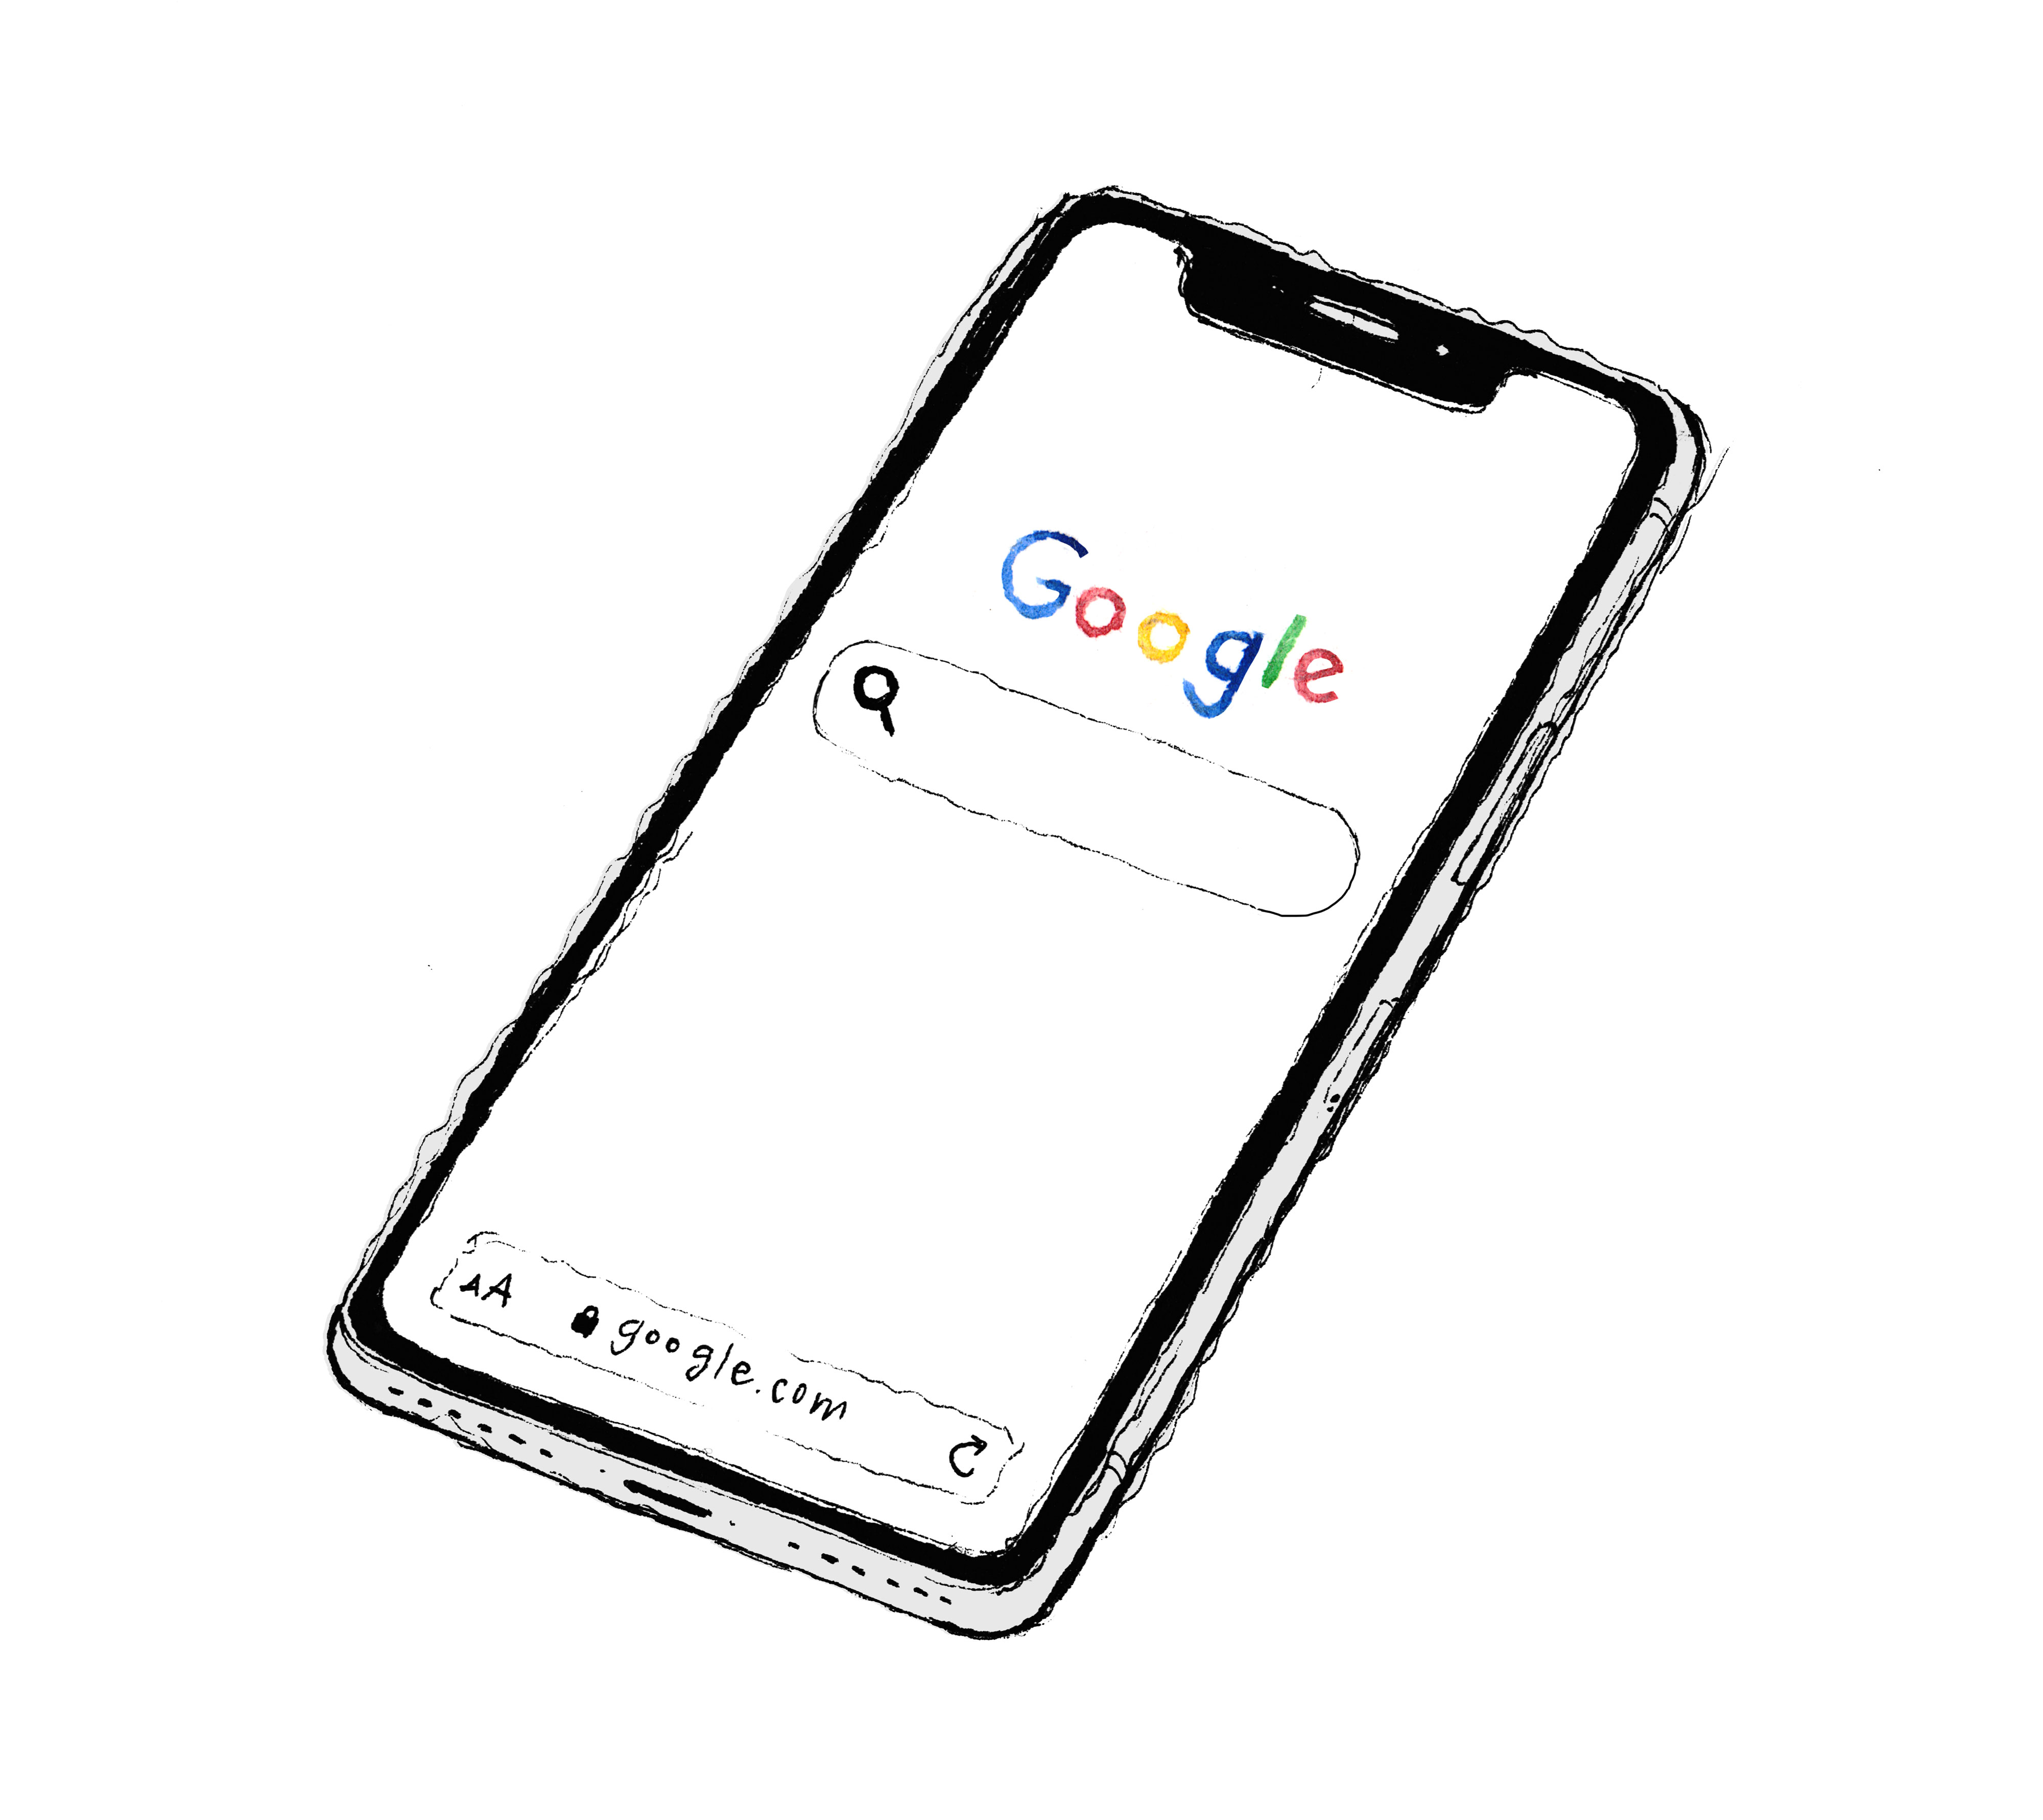 Sketch of an iPhone with a web browser displaying Google's search site.